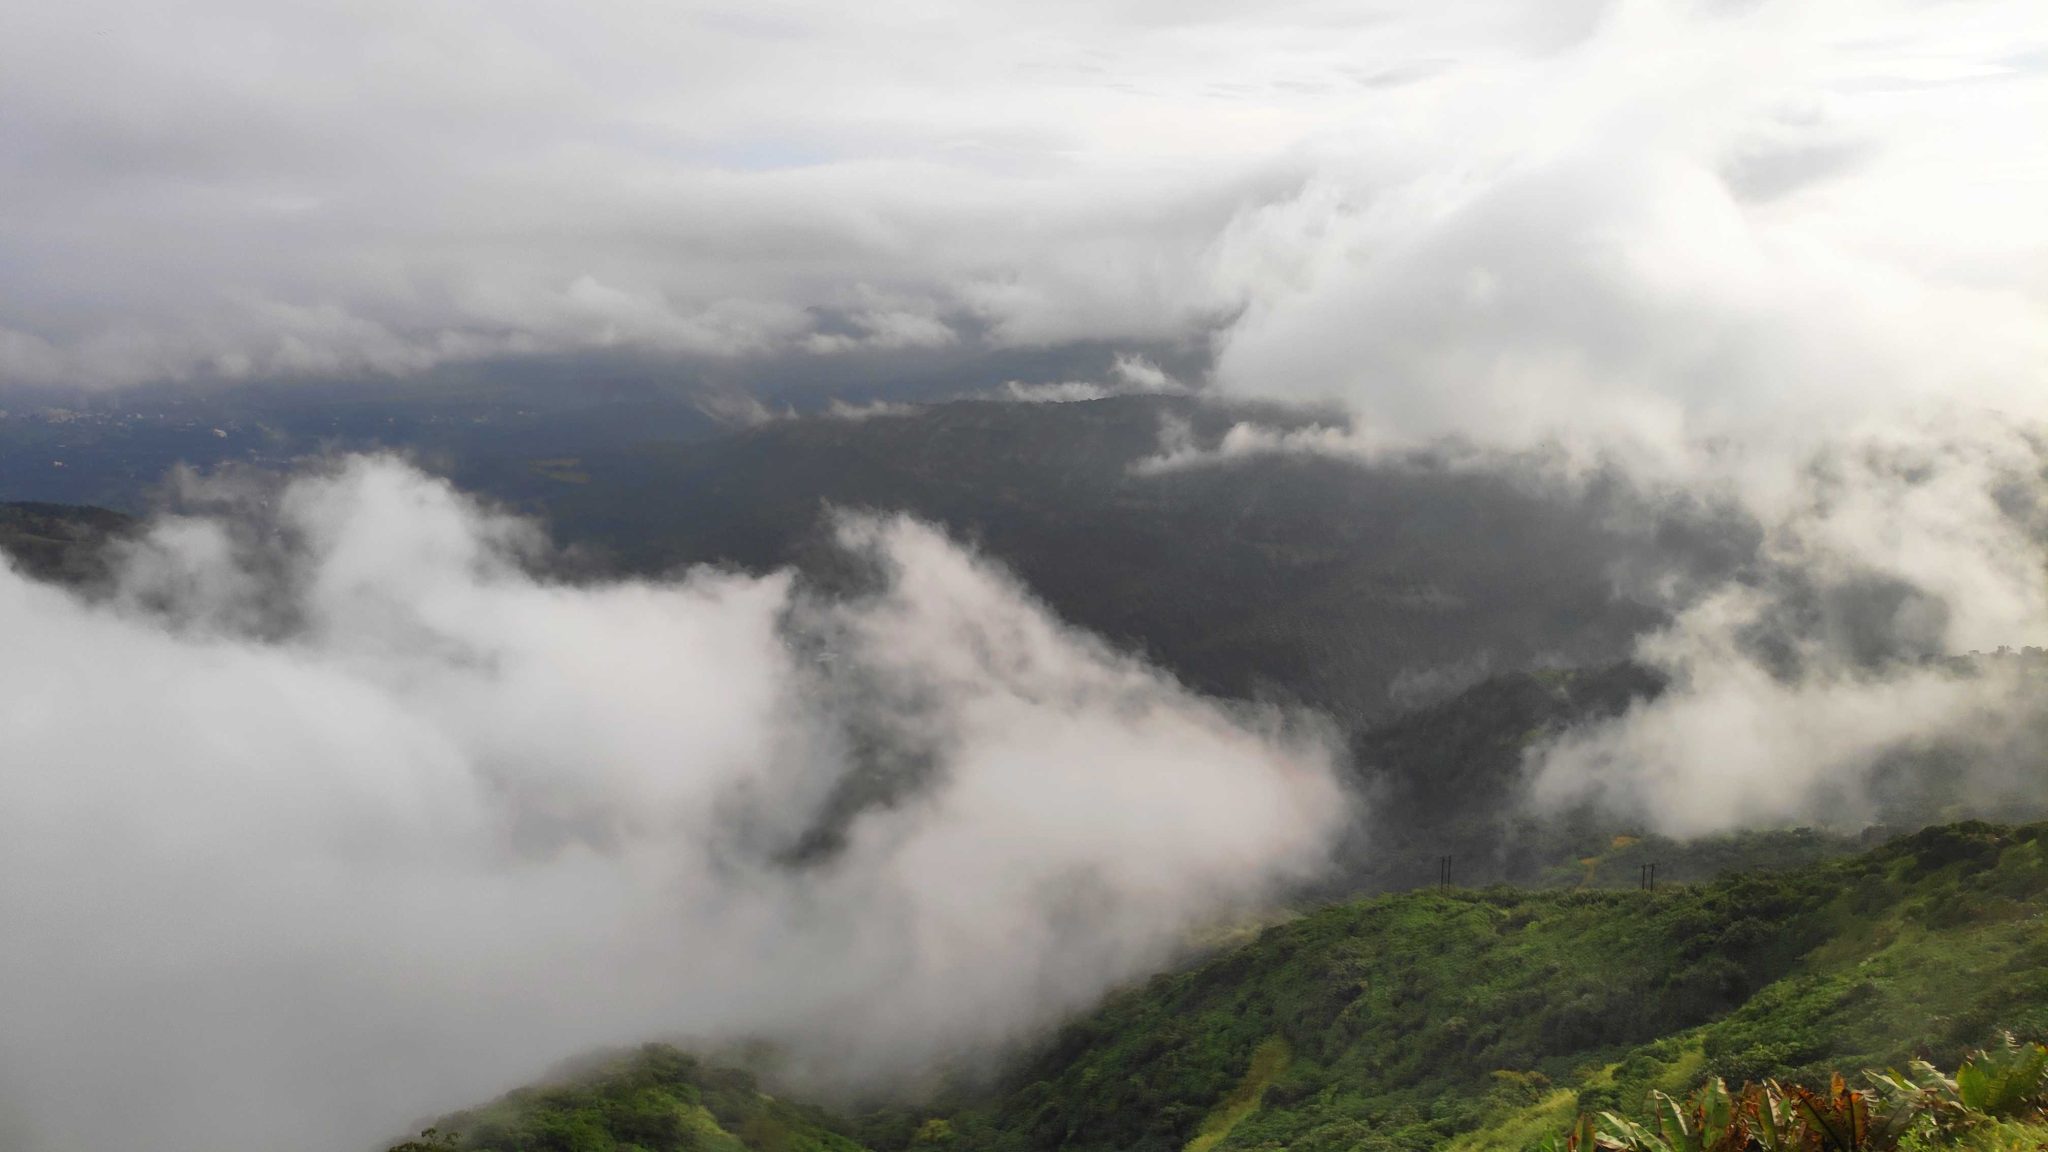 Cloud, Fog, Hills and Nature from Sinhgad Fort